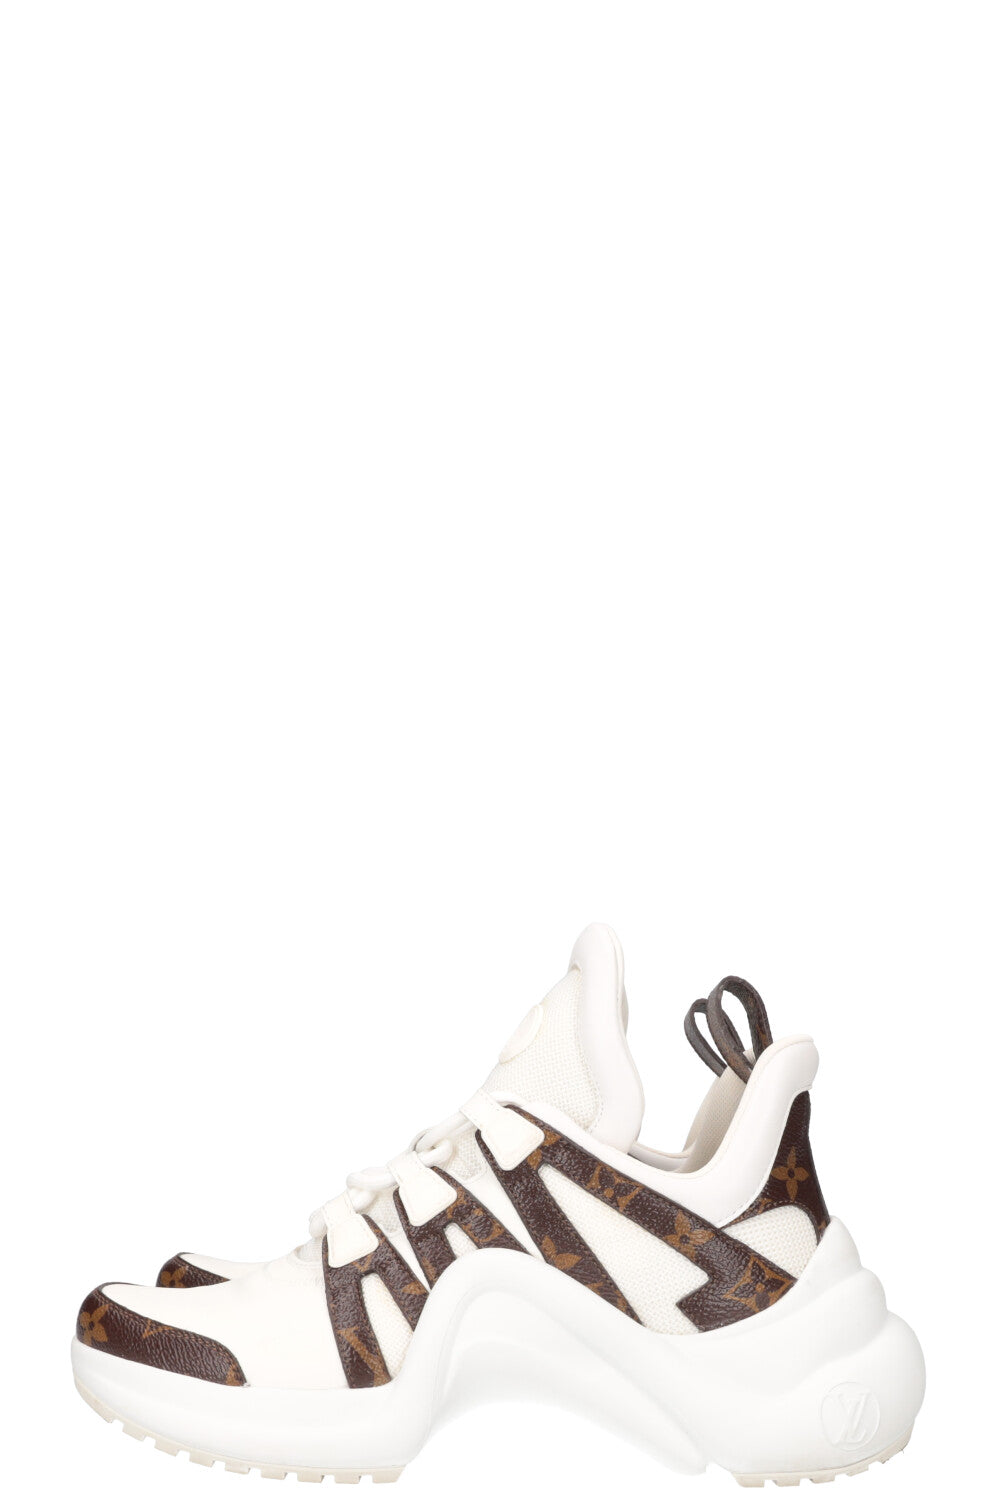 LOUIS VUITON Archlight Sneakers MNG White